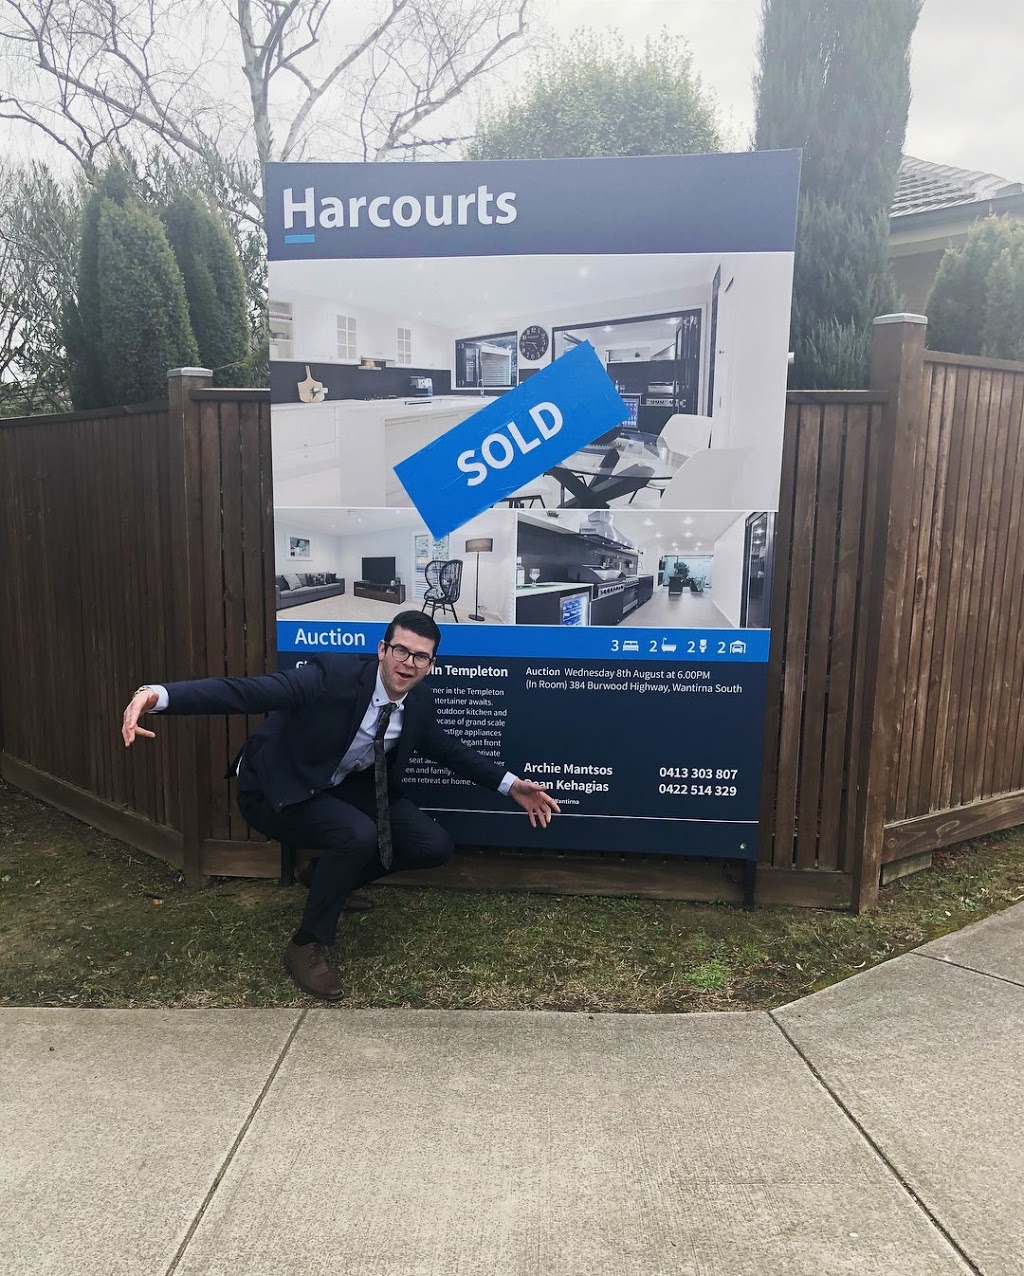 Harcourts Wantirna | real estate agency | 5/249 Stud Rd, Wantirna South VIC 3152, Australia | 0398000100 OR +61 3 9800 0100